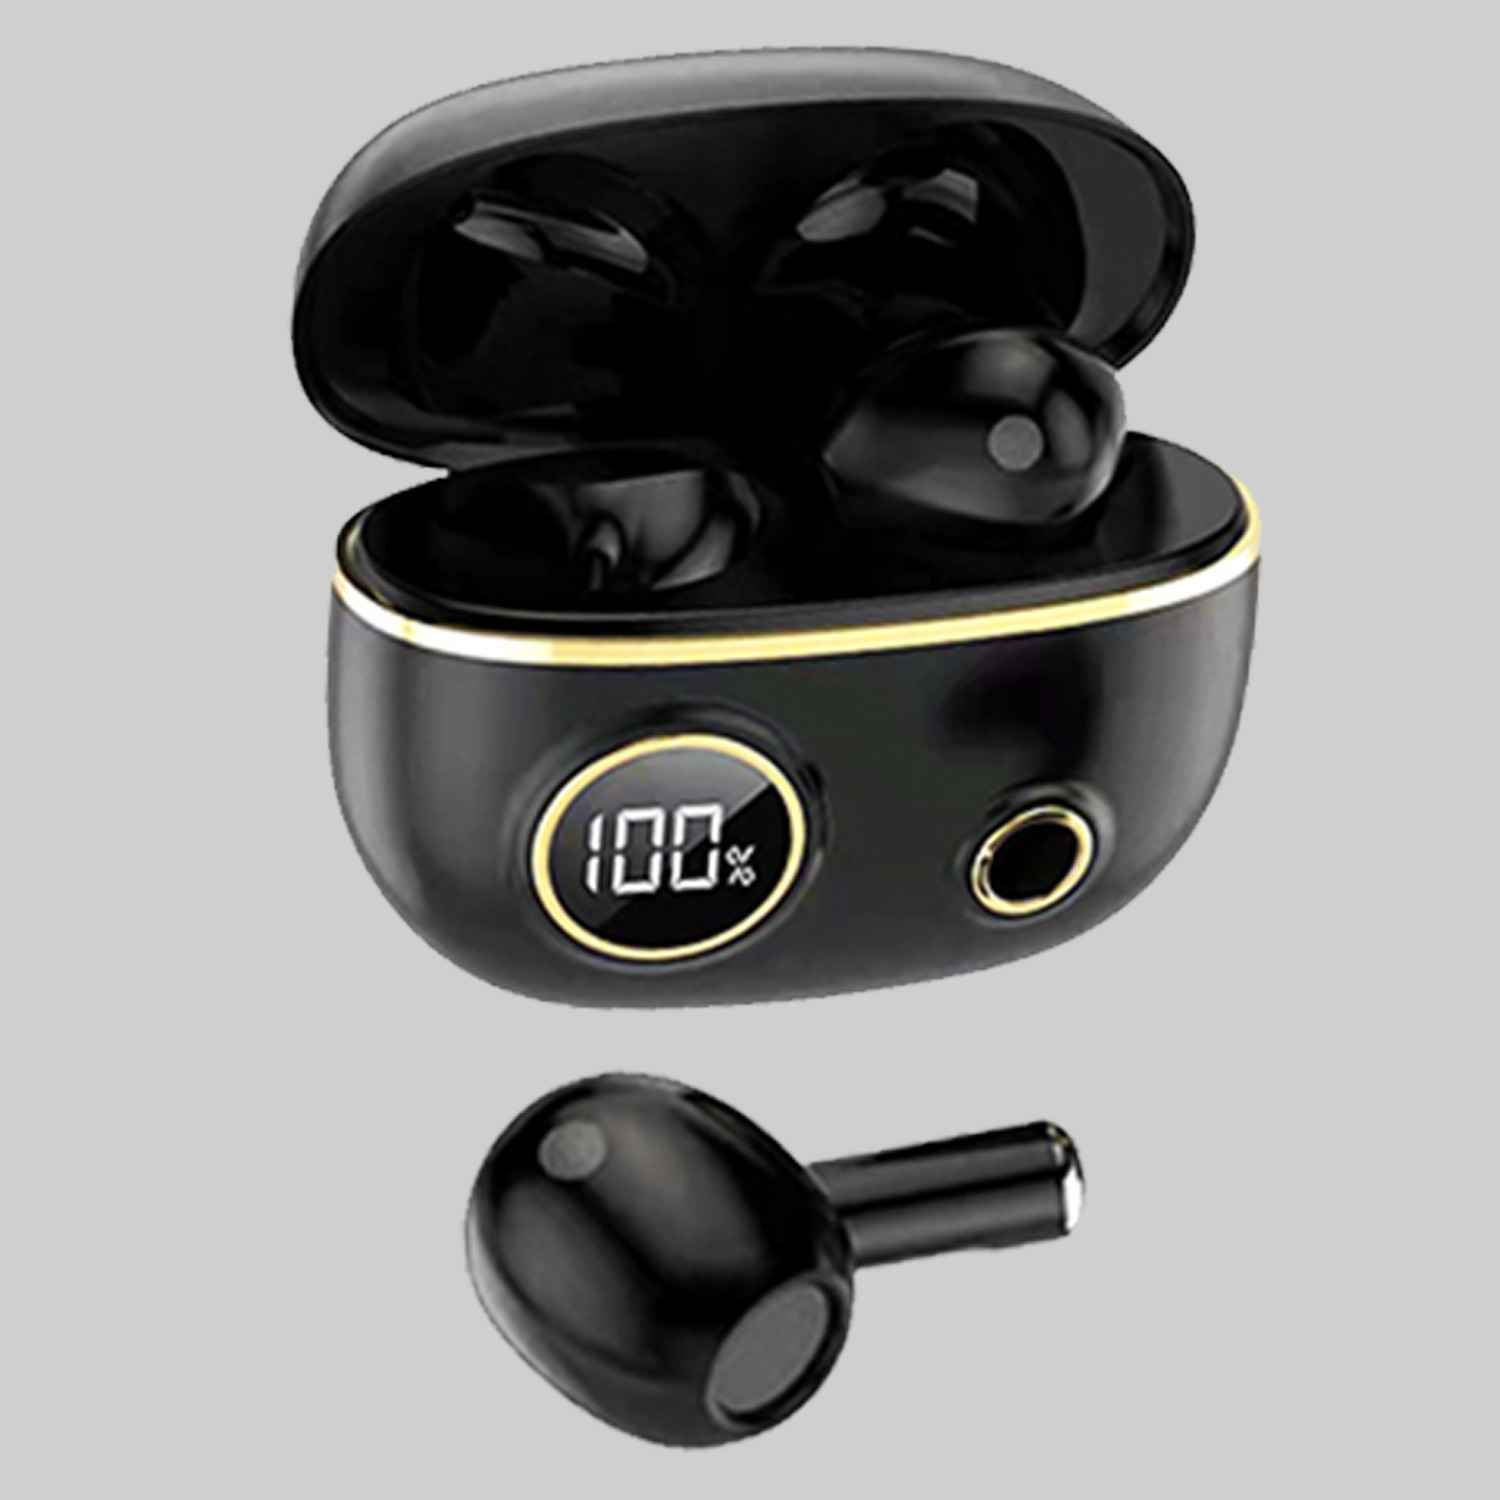 8 TWS Wireless Earbuds With Noise Cancelling (Black)